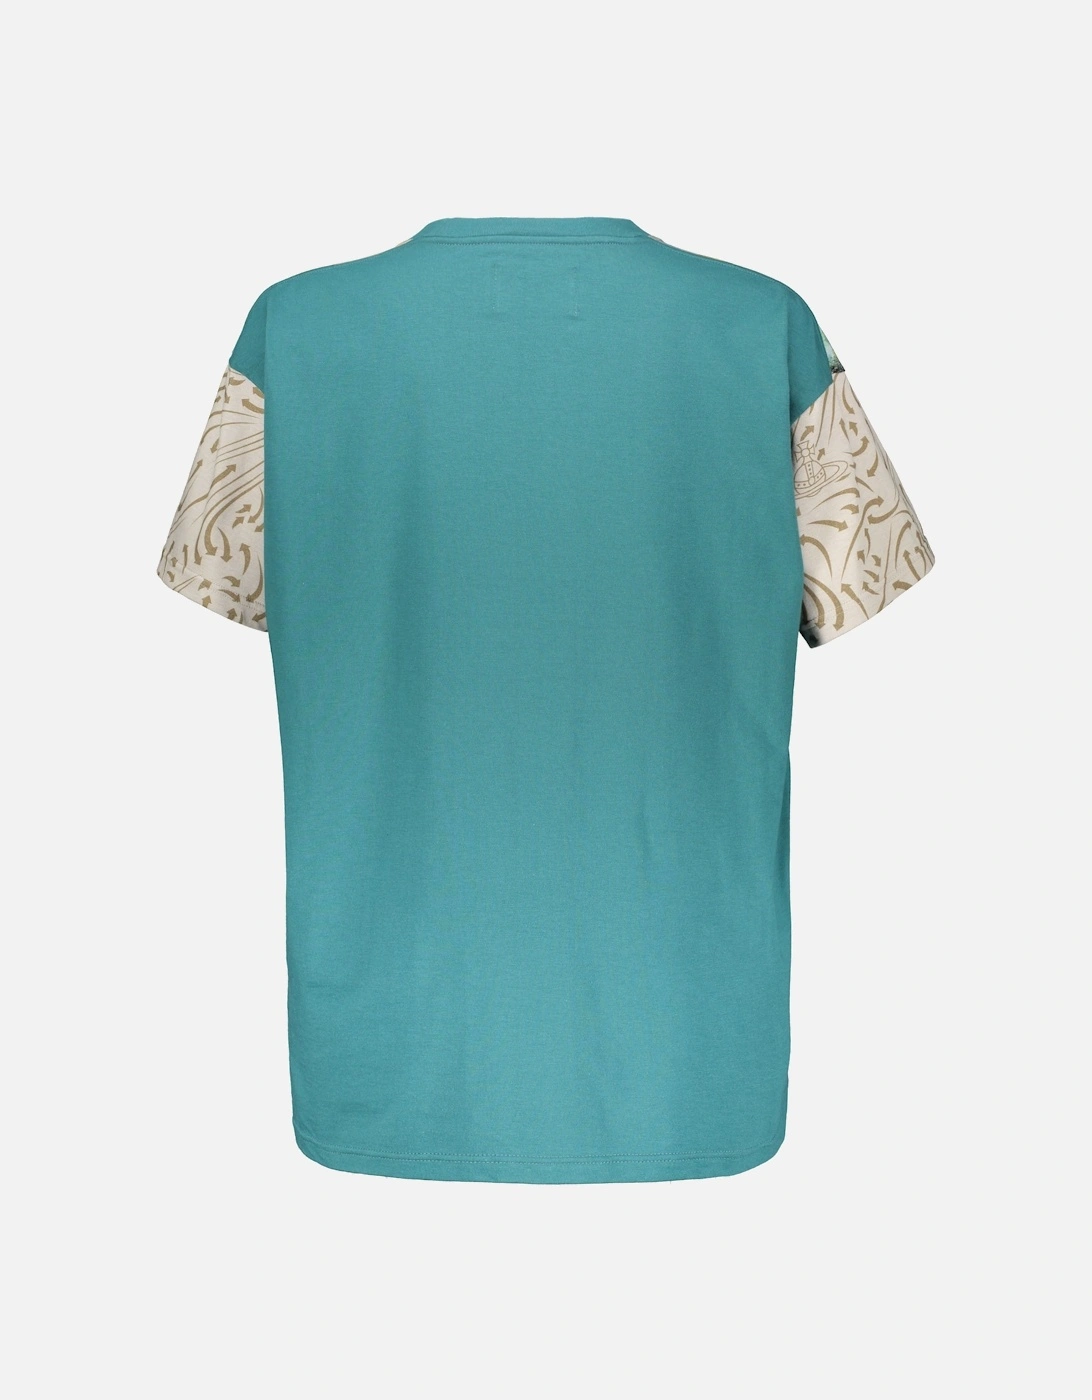 Printed Boucher - Teal